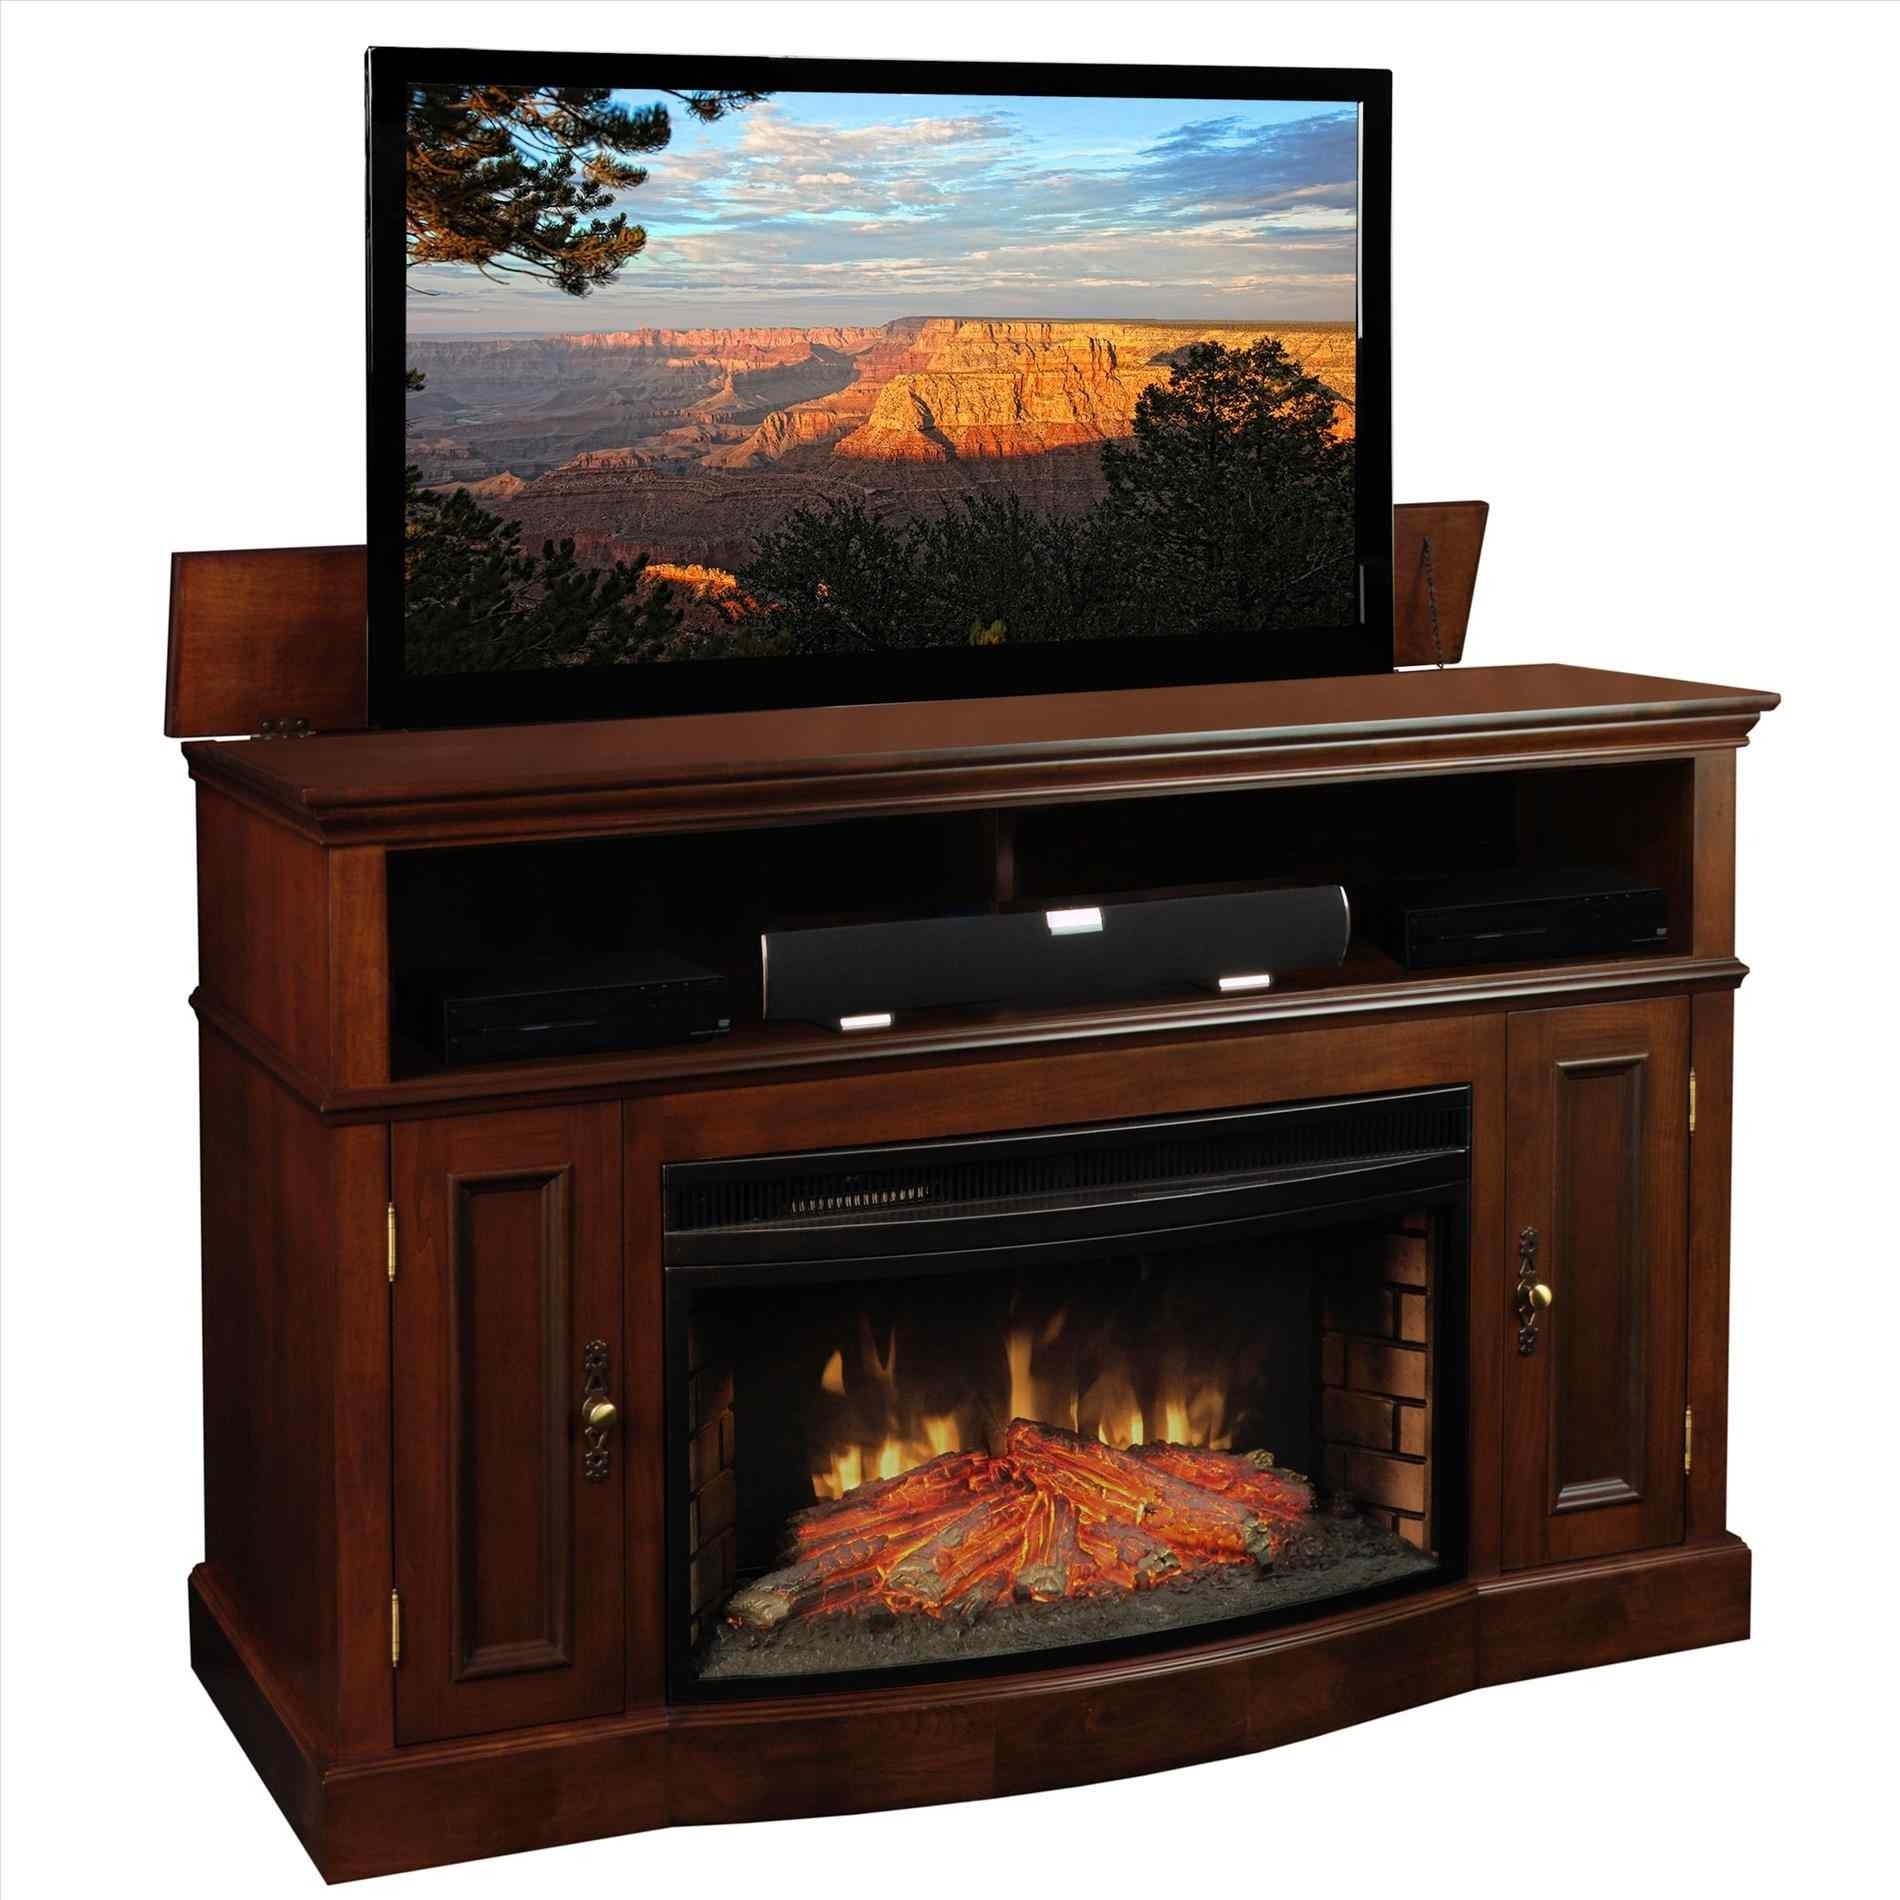 Tv stand for fireplace mantel